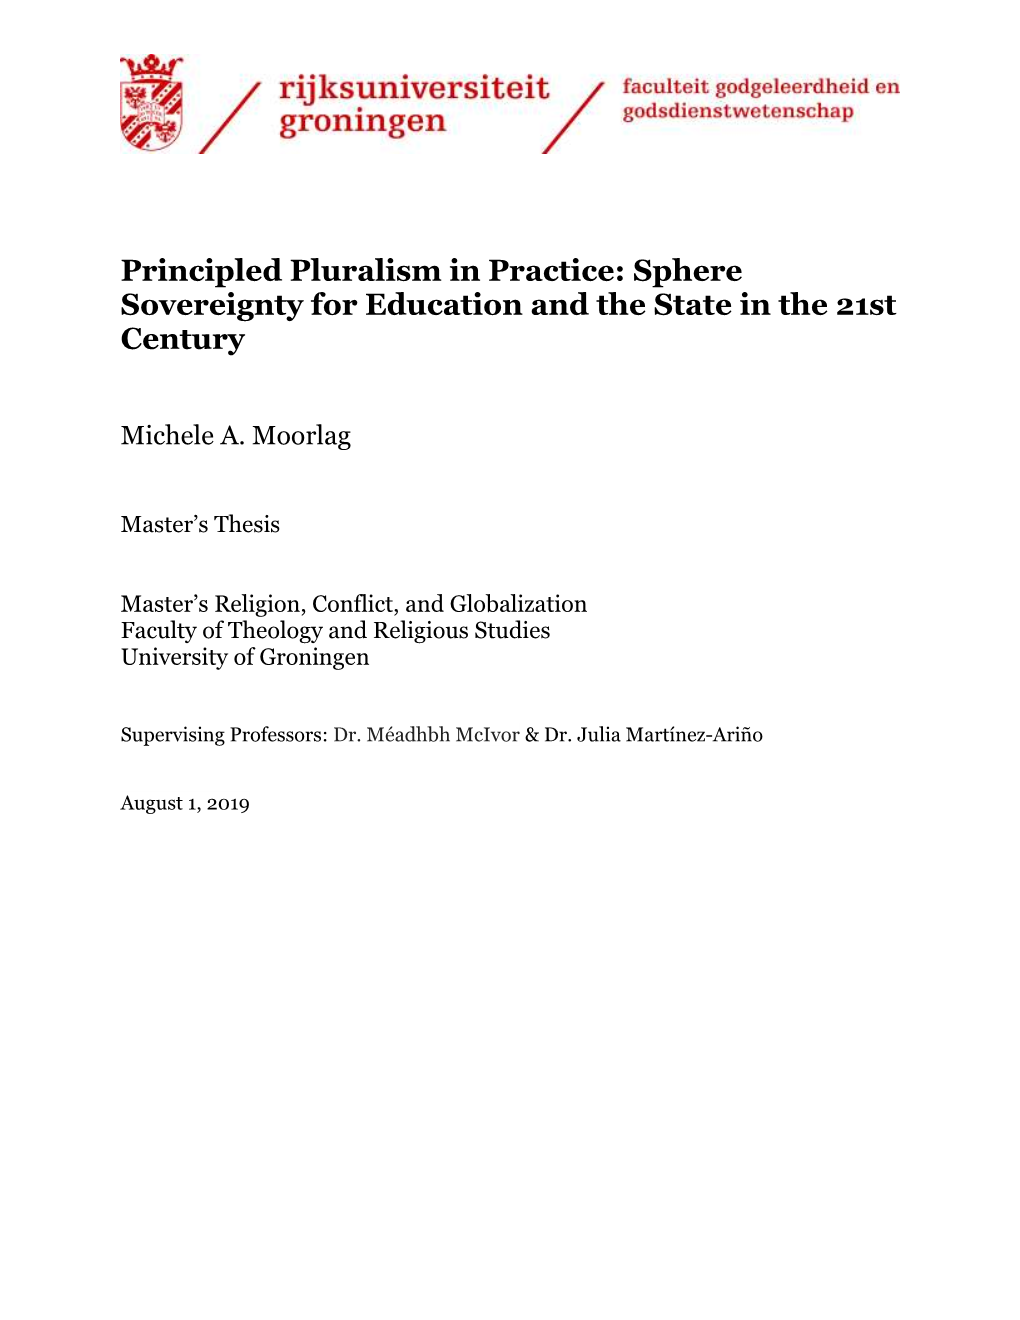 Principled Pluralism in Practice: Sphere Sovereignty for Education and the State in the 21St Century